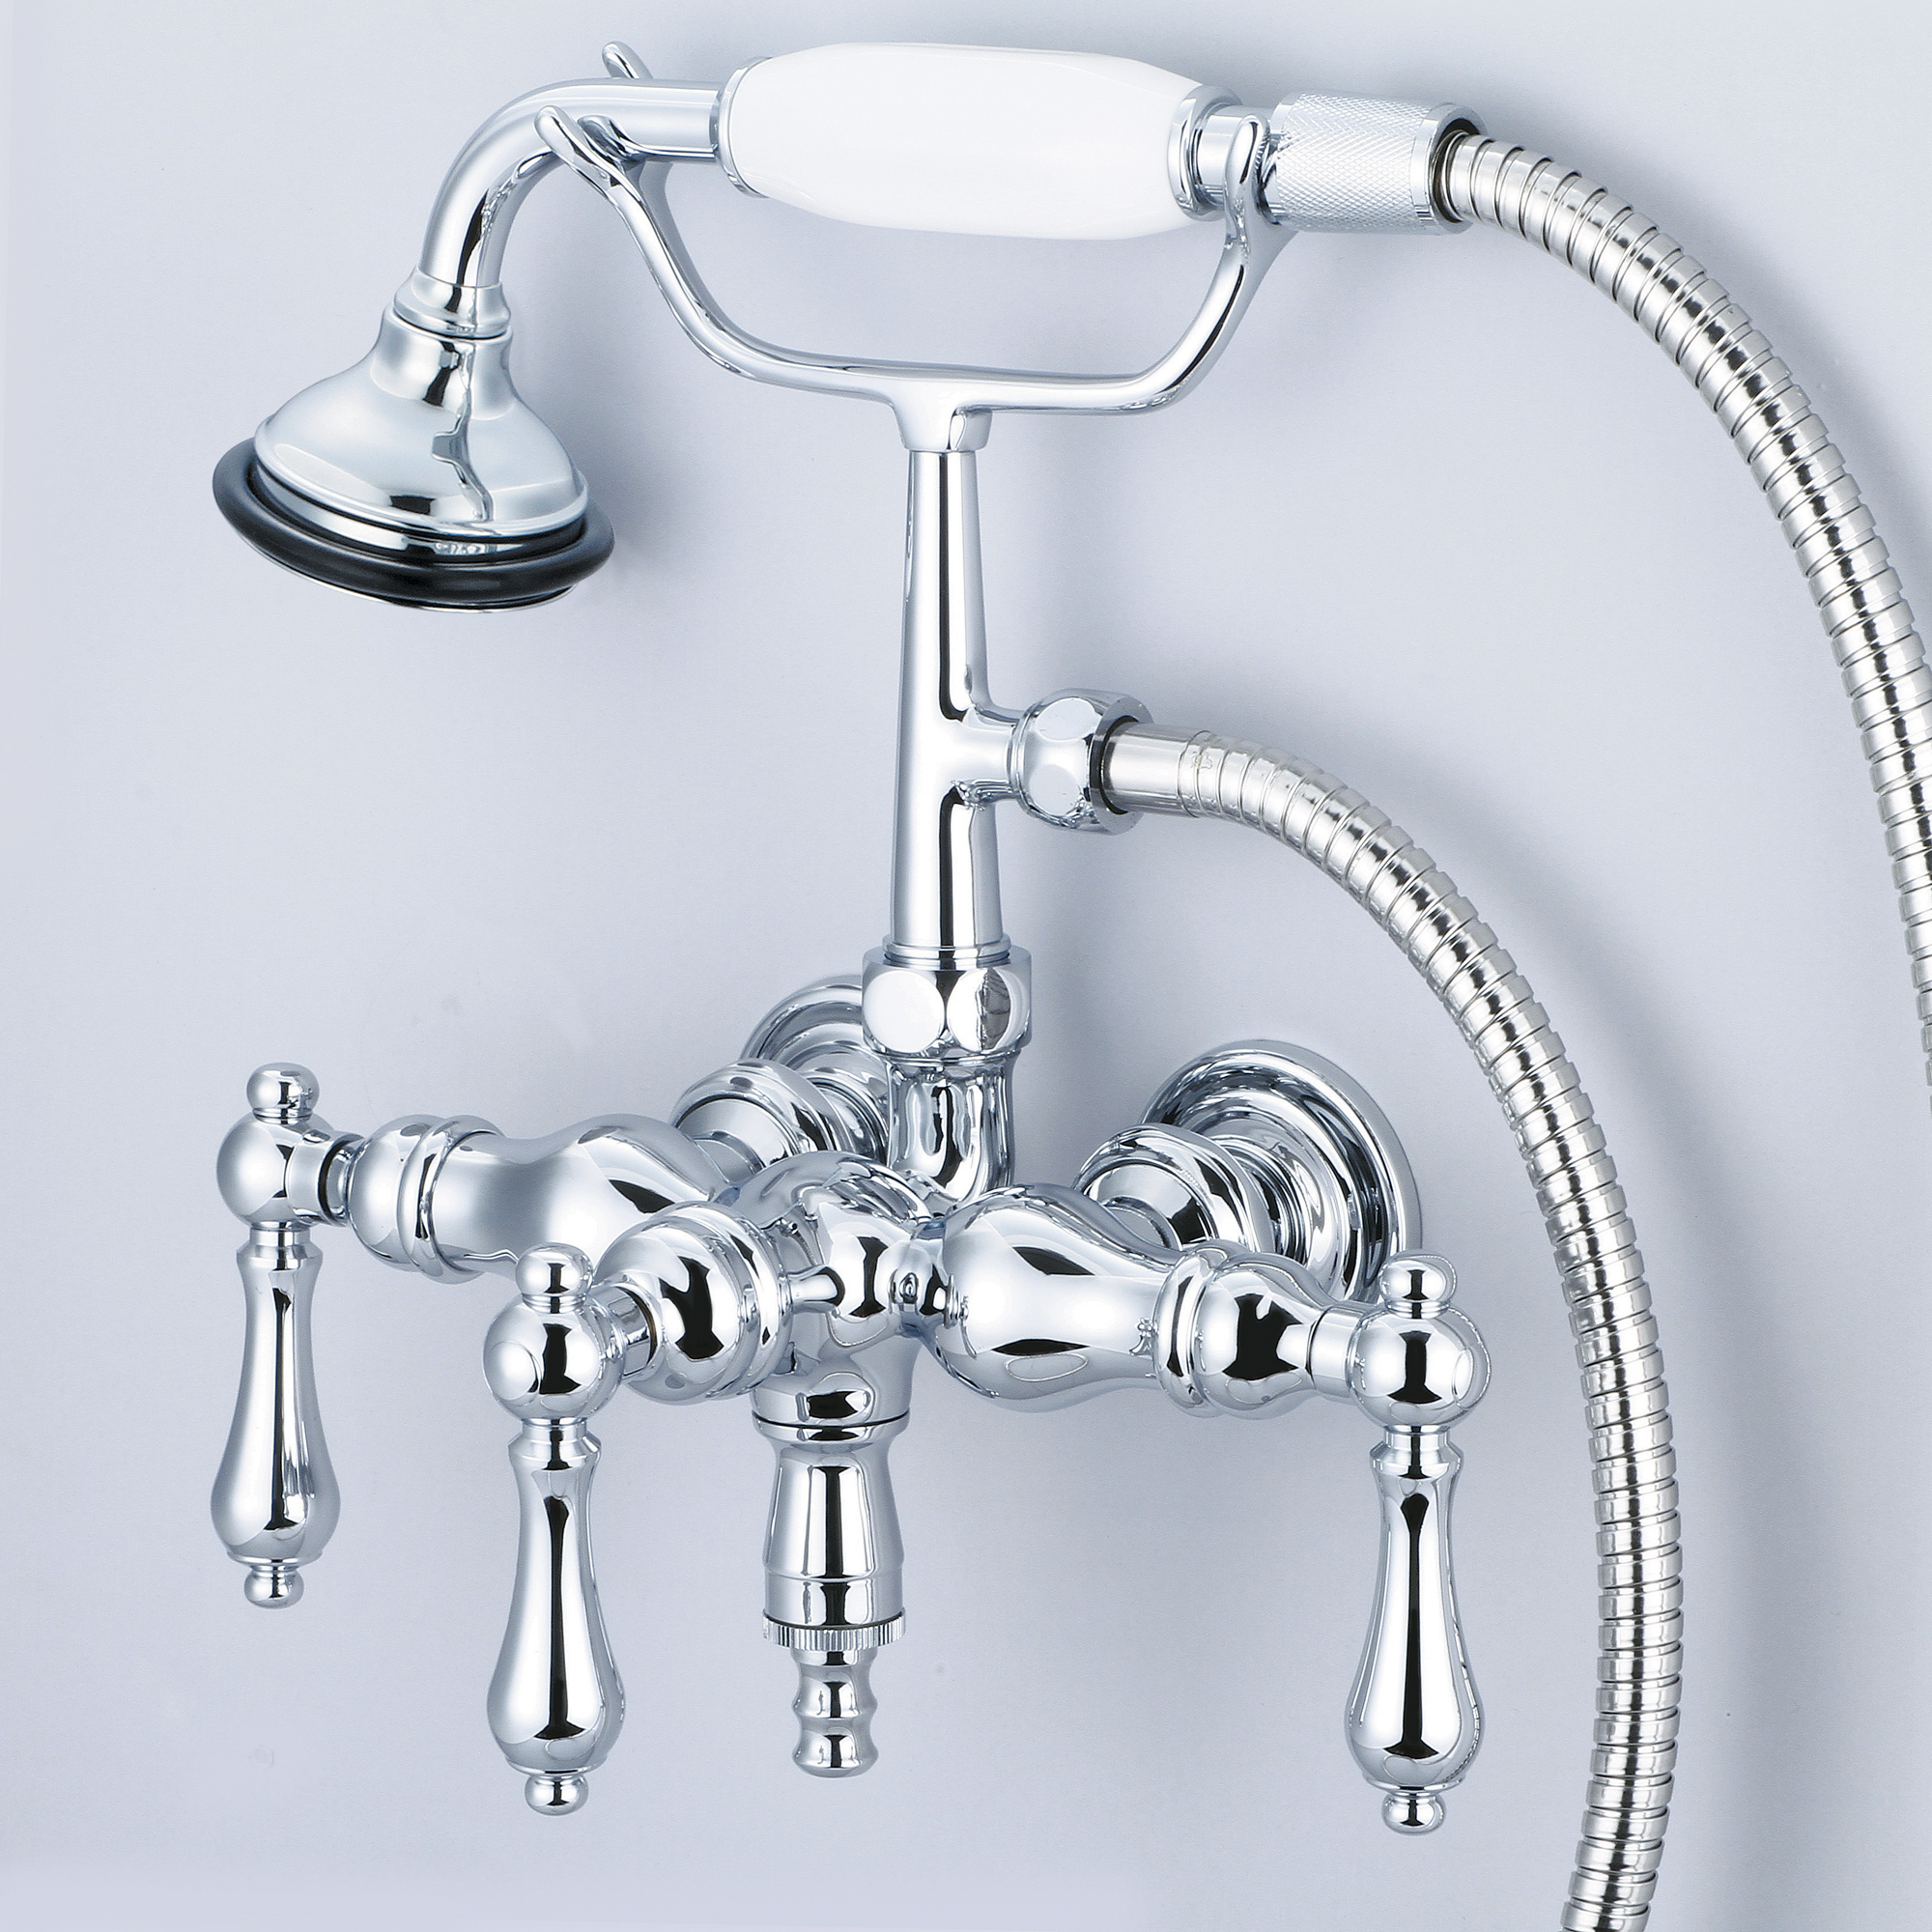 Vintage Classic 3.375 Inch Center Wall Mount Tub Faucet With Down Spout, Straight Wall Connector & Handheld Shower in Chrome Finish With Metal Lever Handles Without Labels